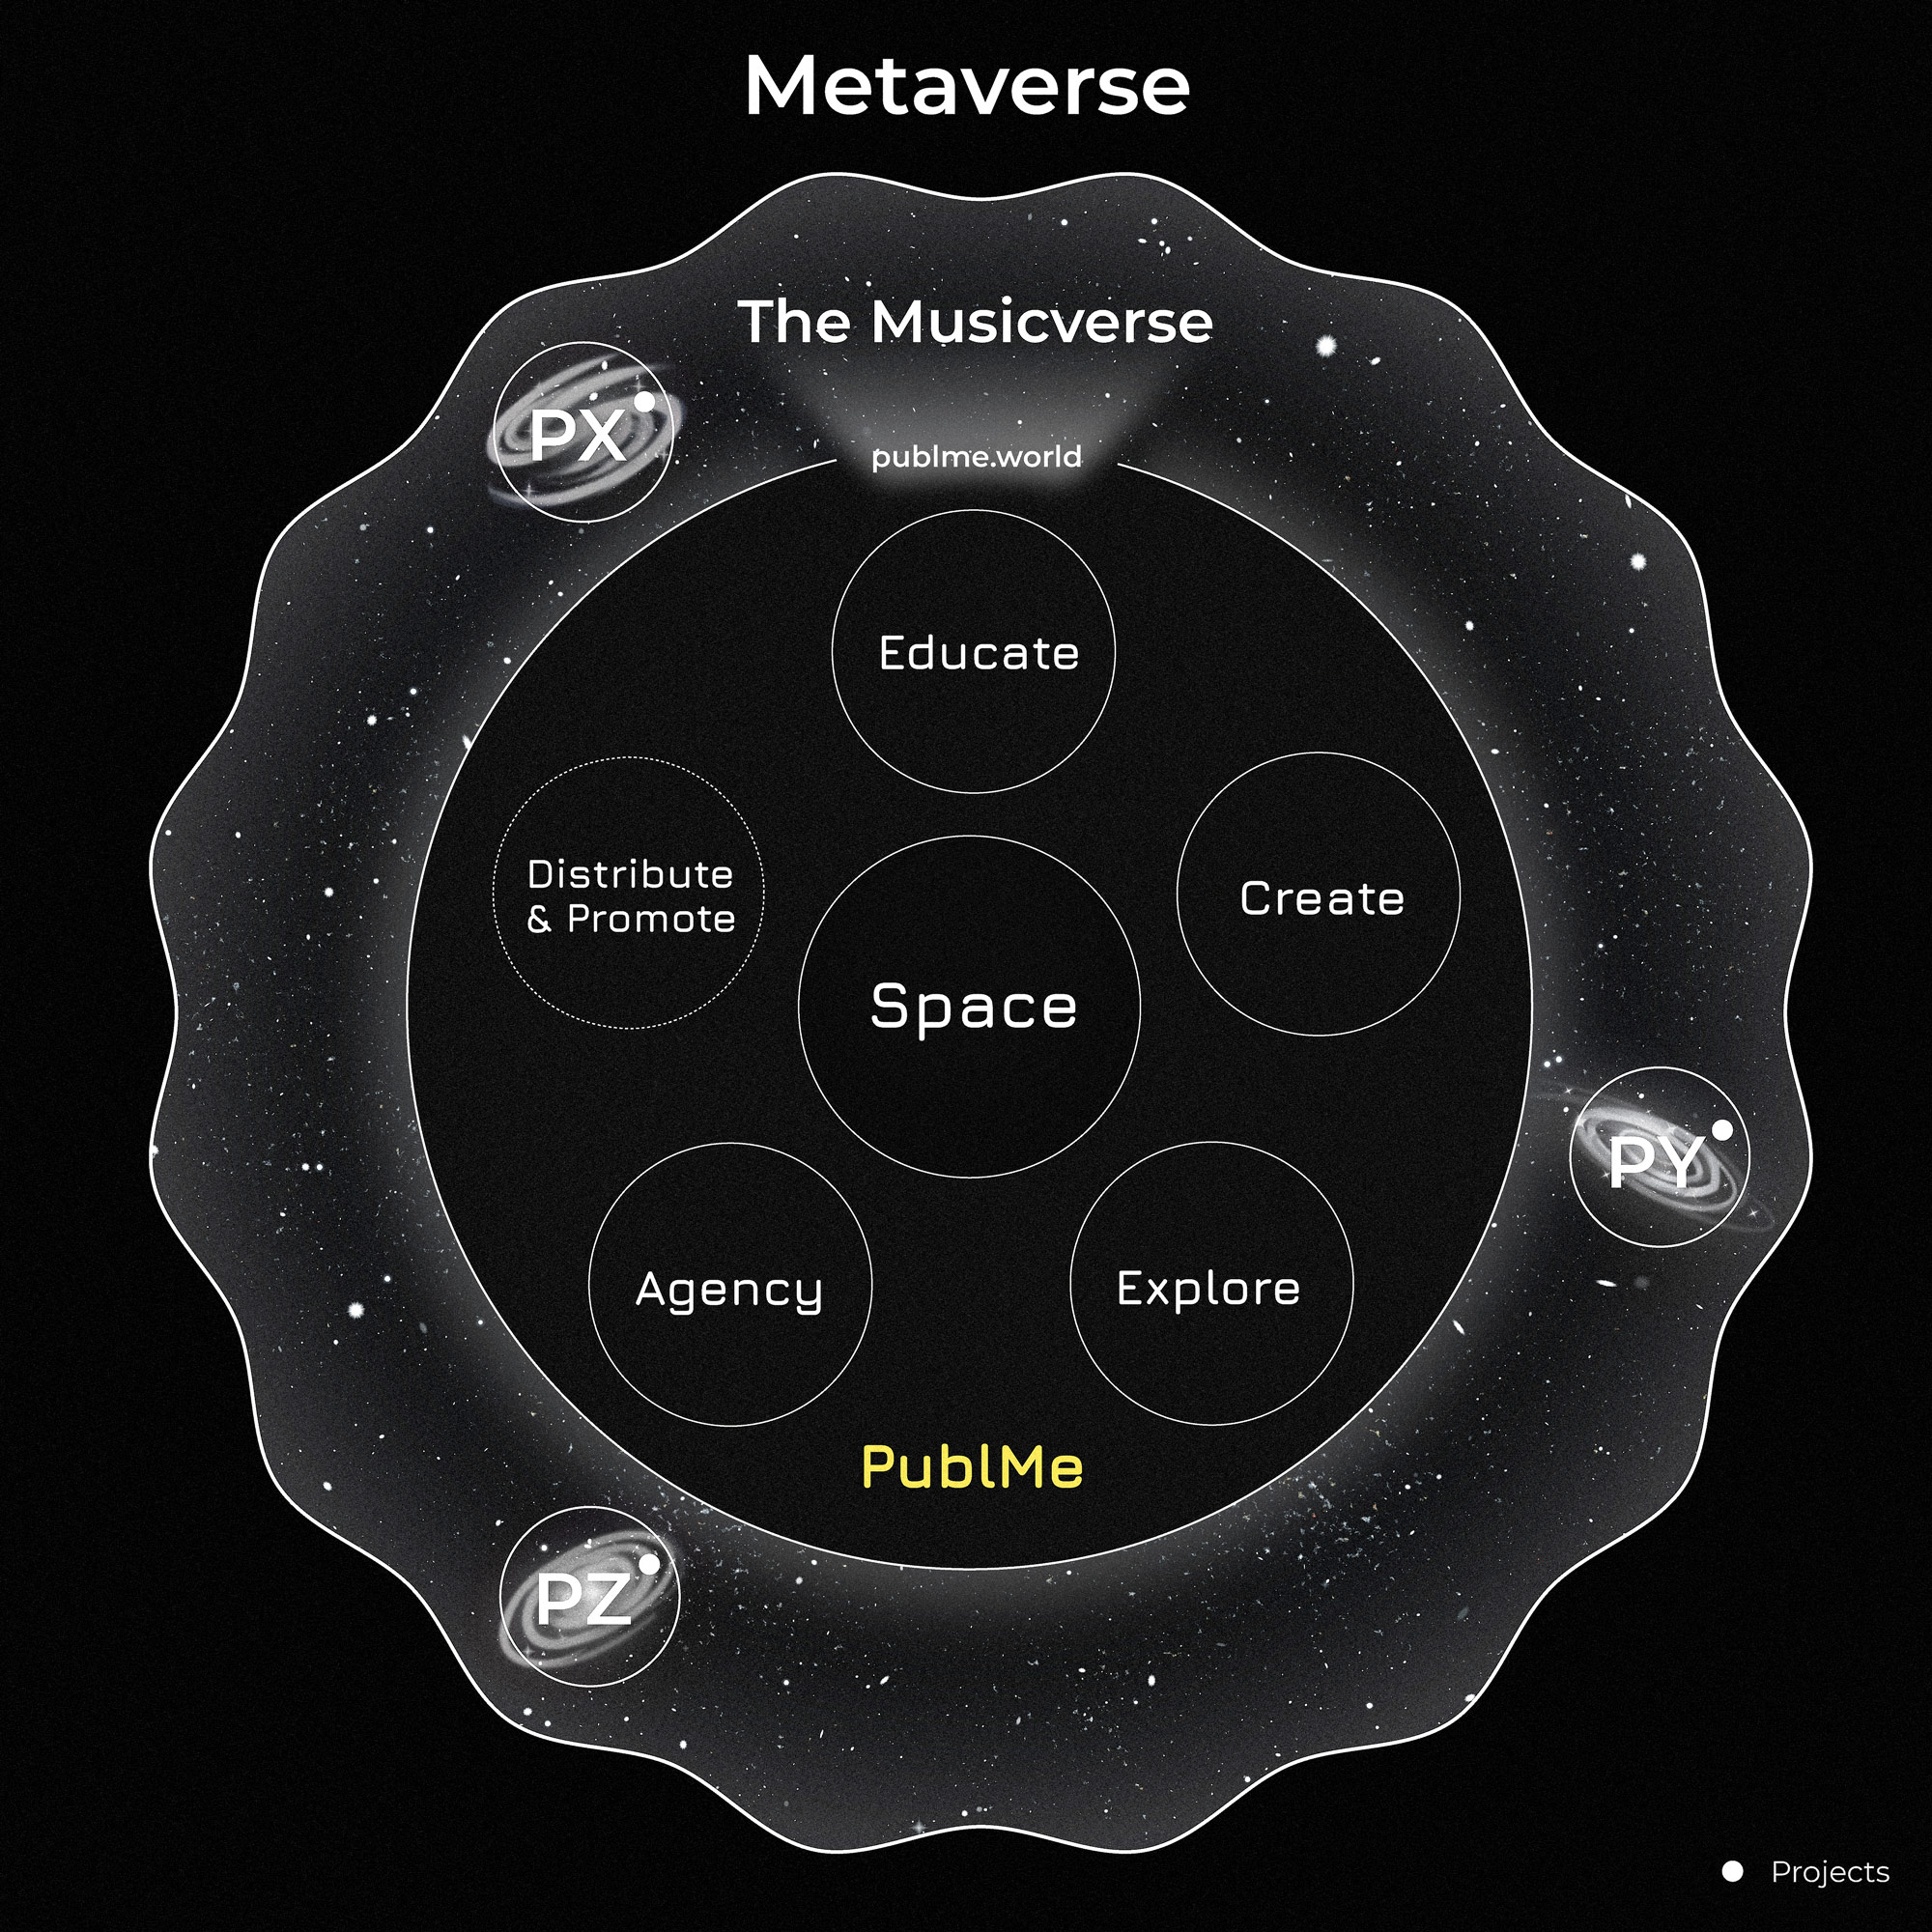 PublMe World and The Musicverse